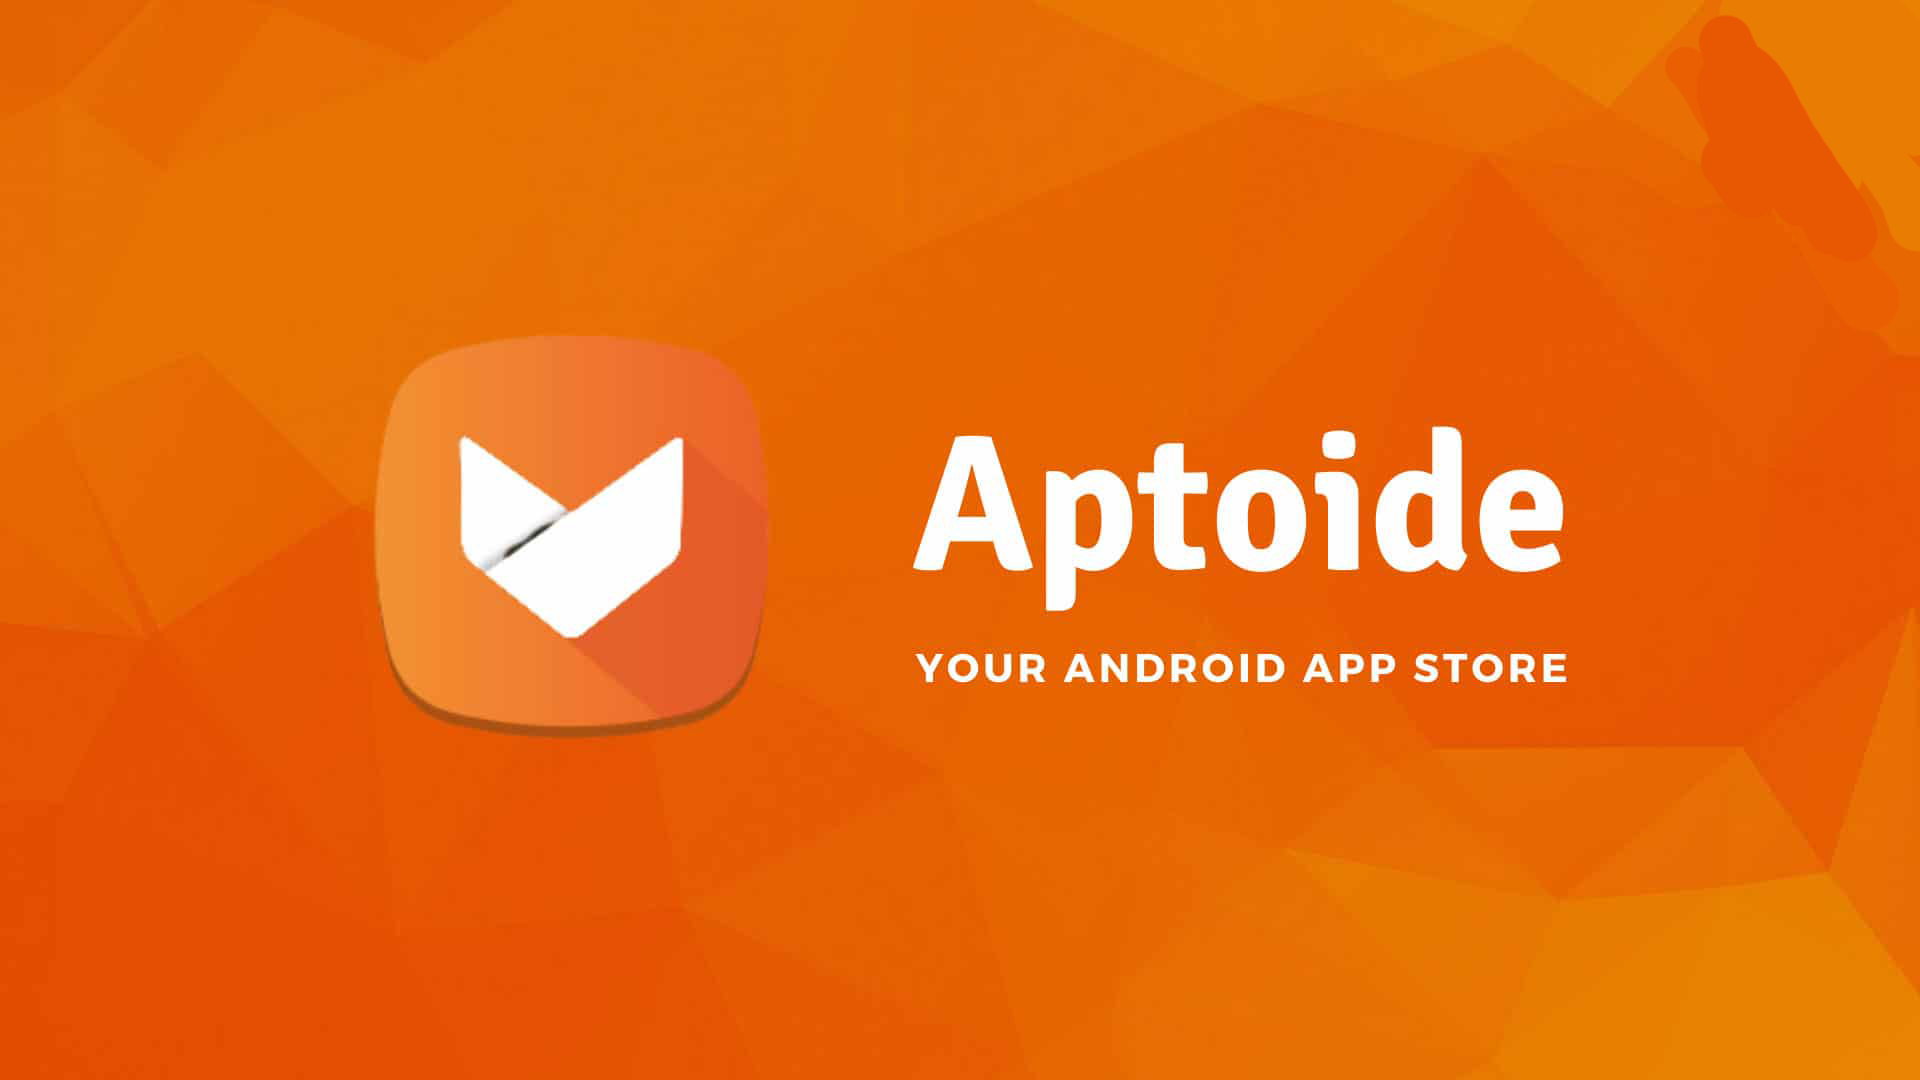 ✓ 2017 Aptolde Download Guide APK for Android Download